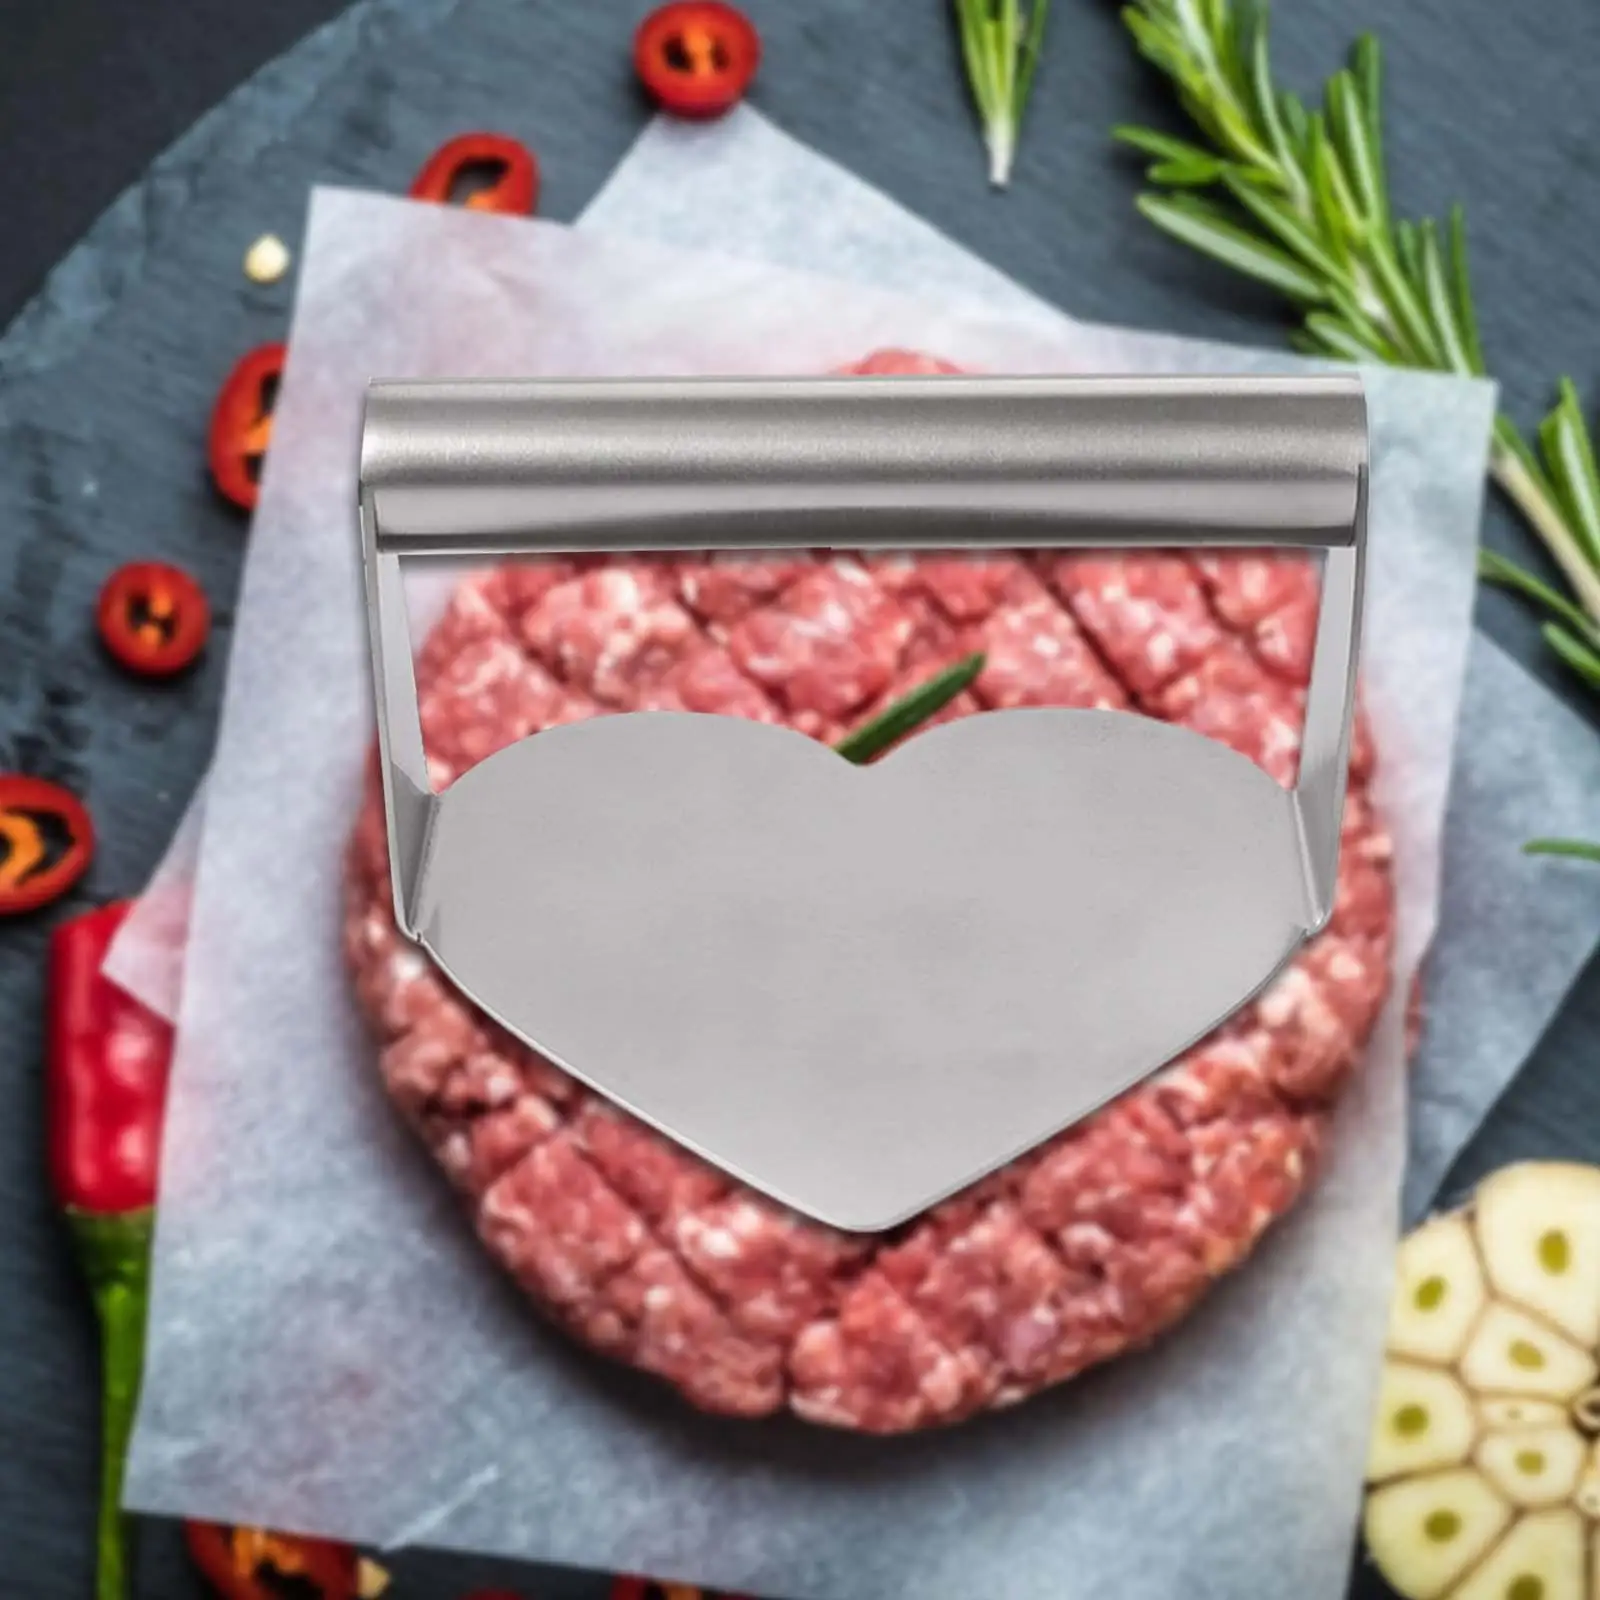 Heavy Duty Burger Press Heart Shaped Grill Press for Panini Tortilla Professional and Home Cooking Flattops Outdoor Grill